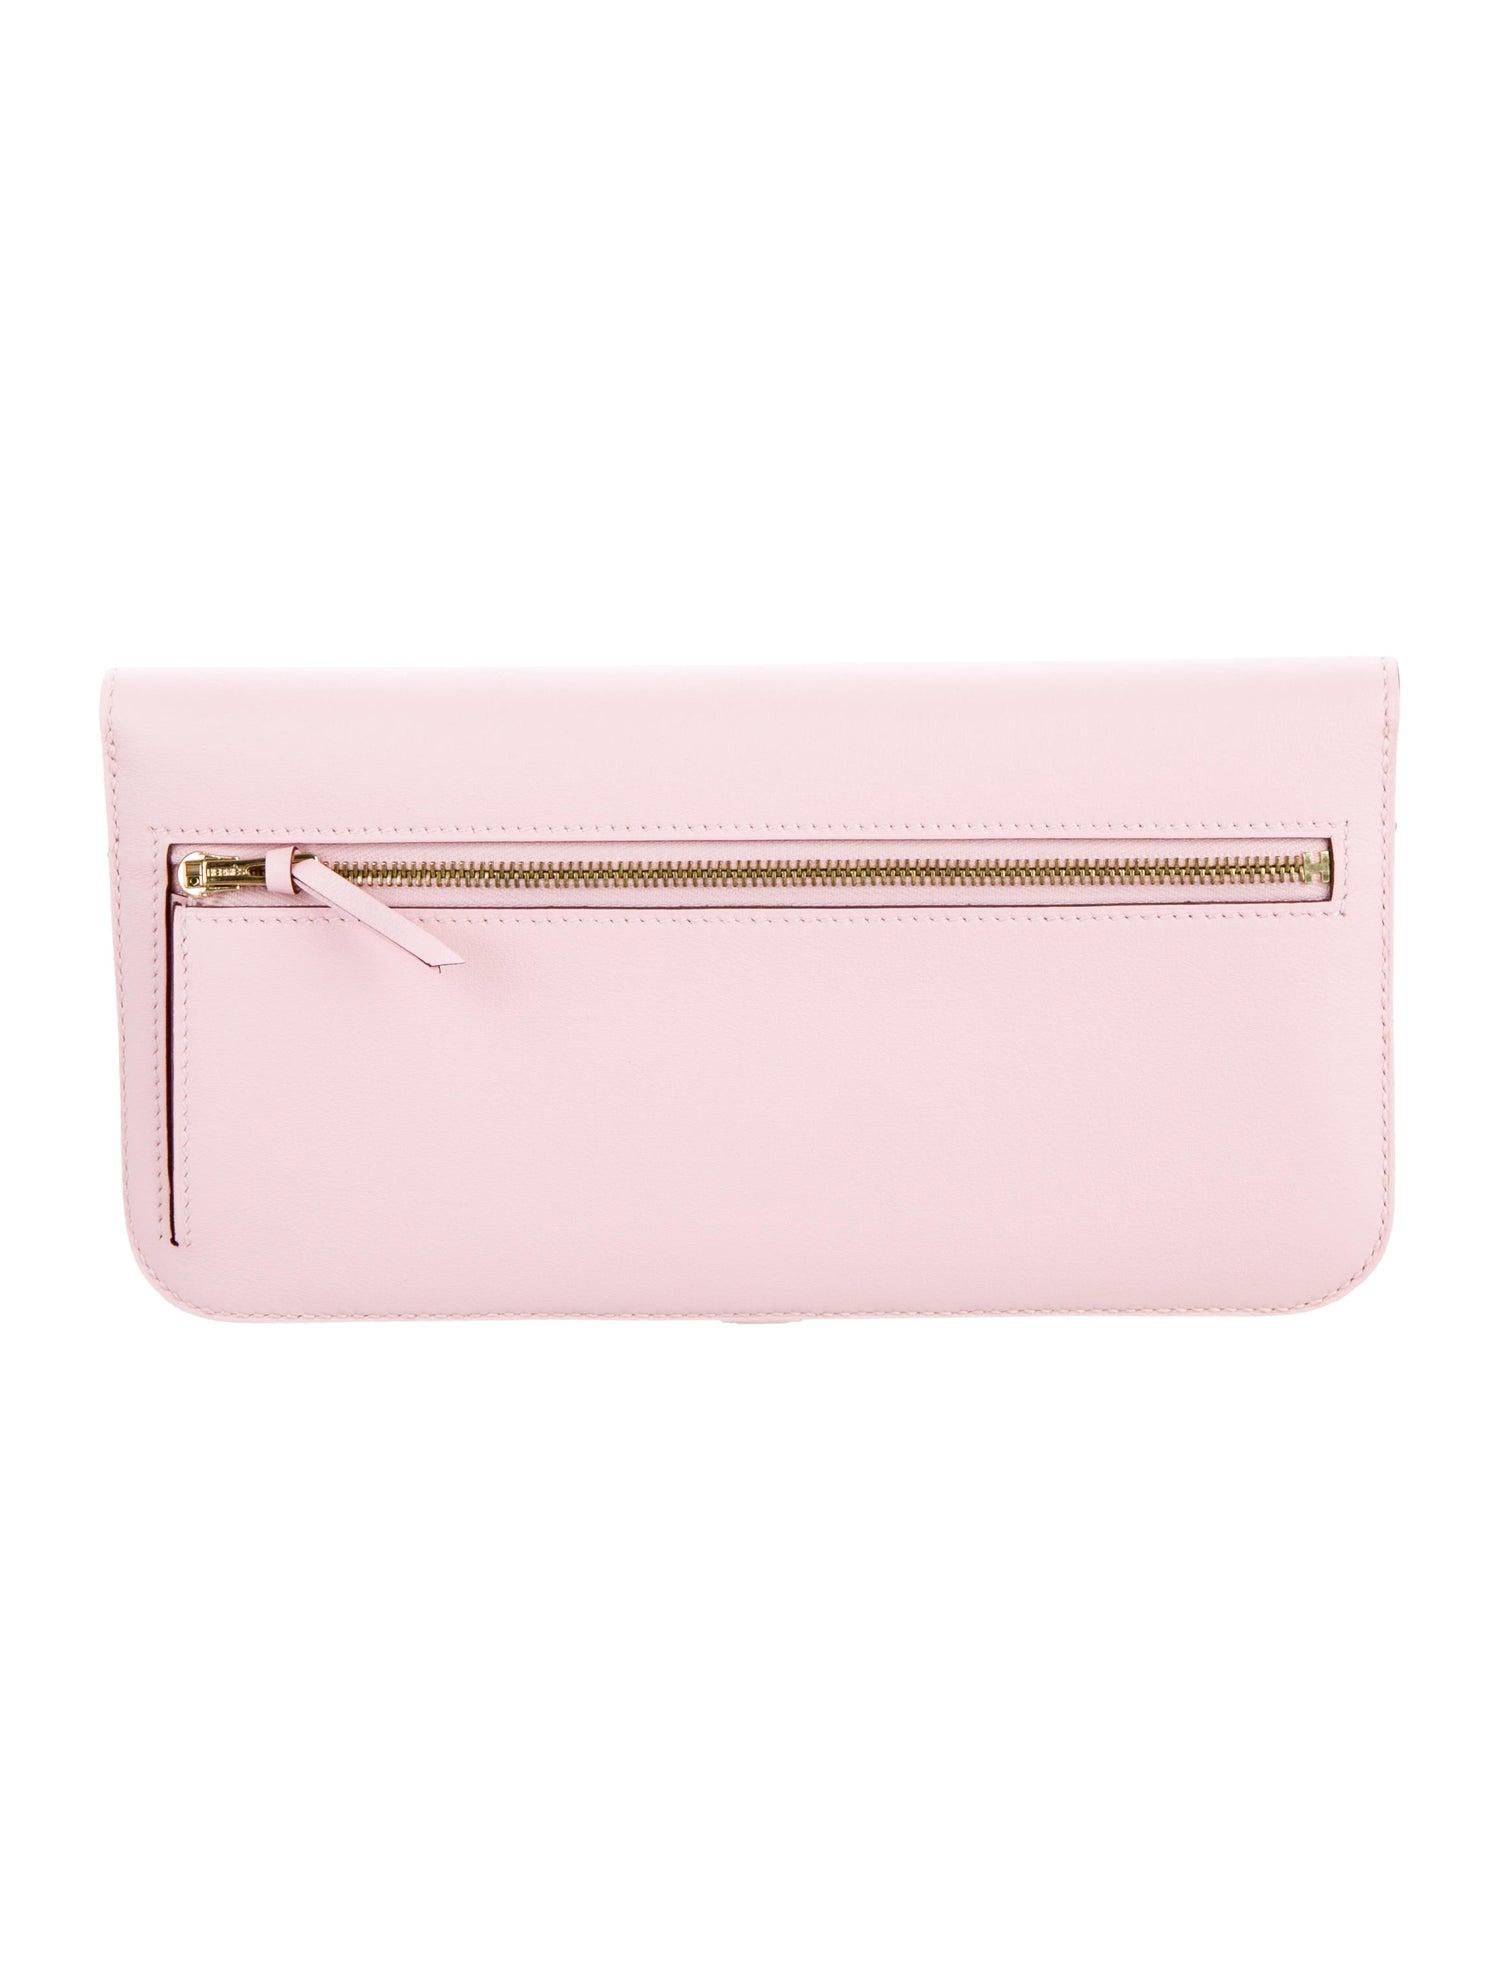 Hermes Light Pink Leather Gold Envelope Evening Clutch Wallet in Box

Leather 
Gold-plated hardware
Leather lining
Belted turnlock closure
Features twelve card slots 
Measures 8